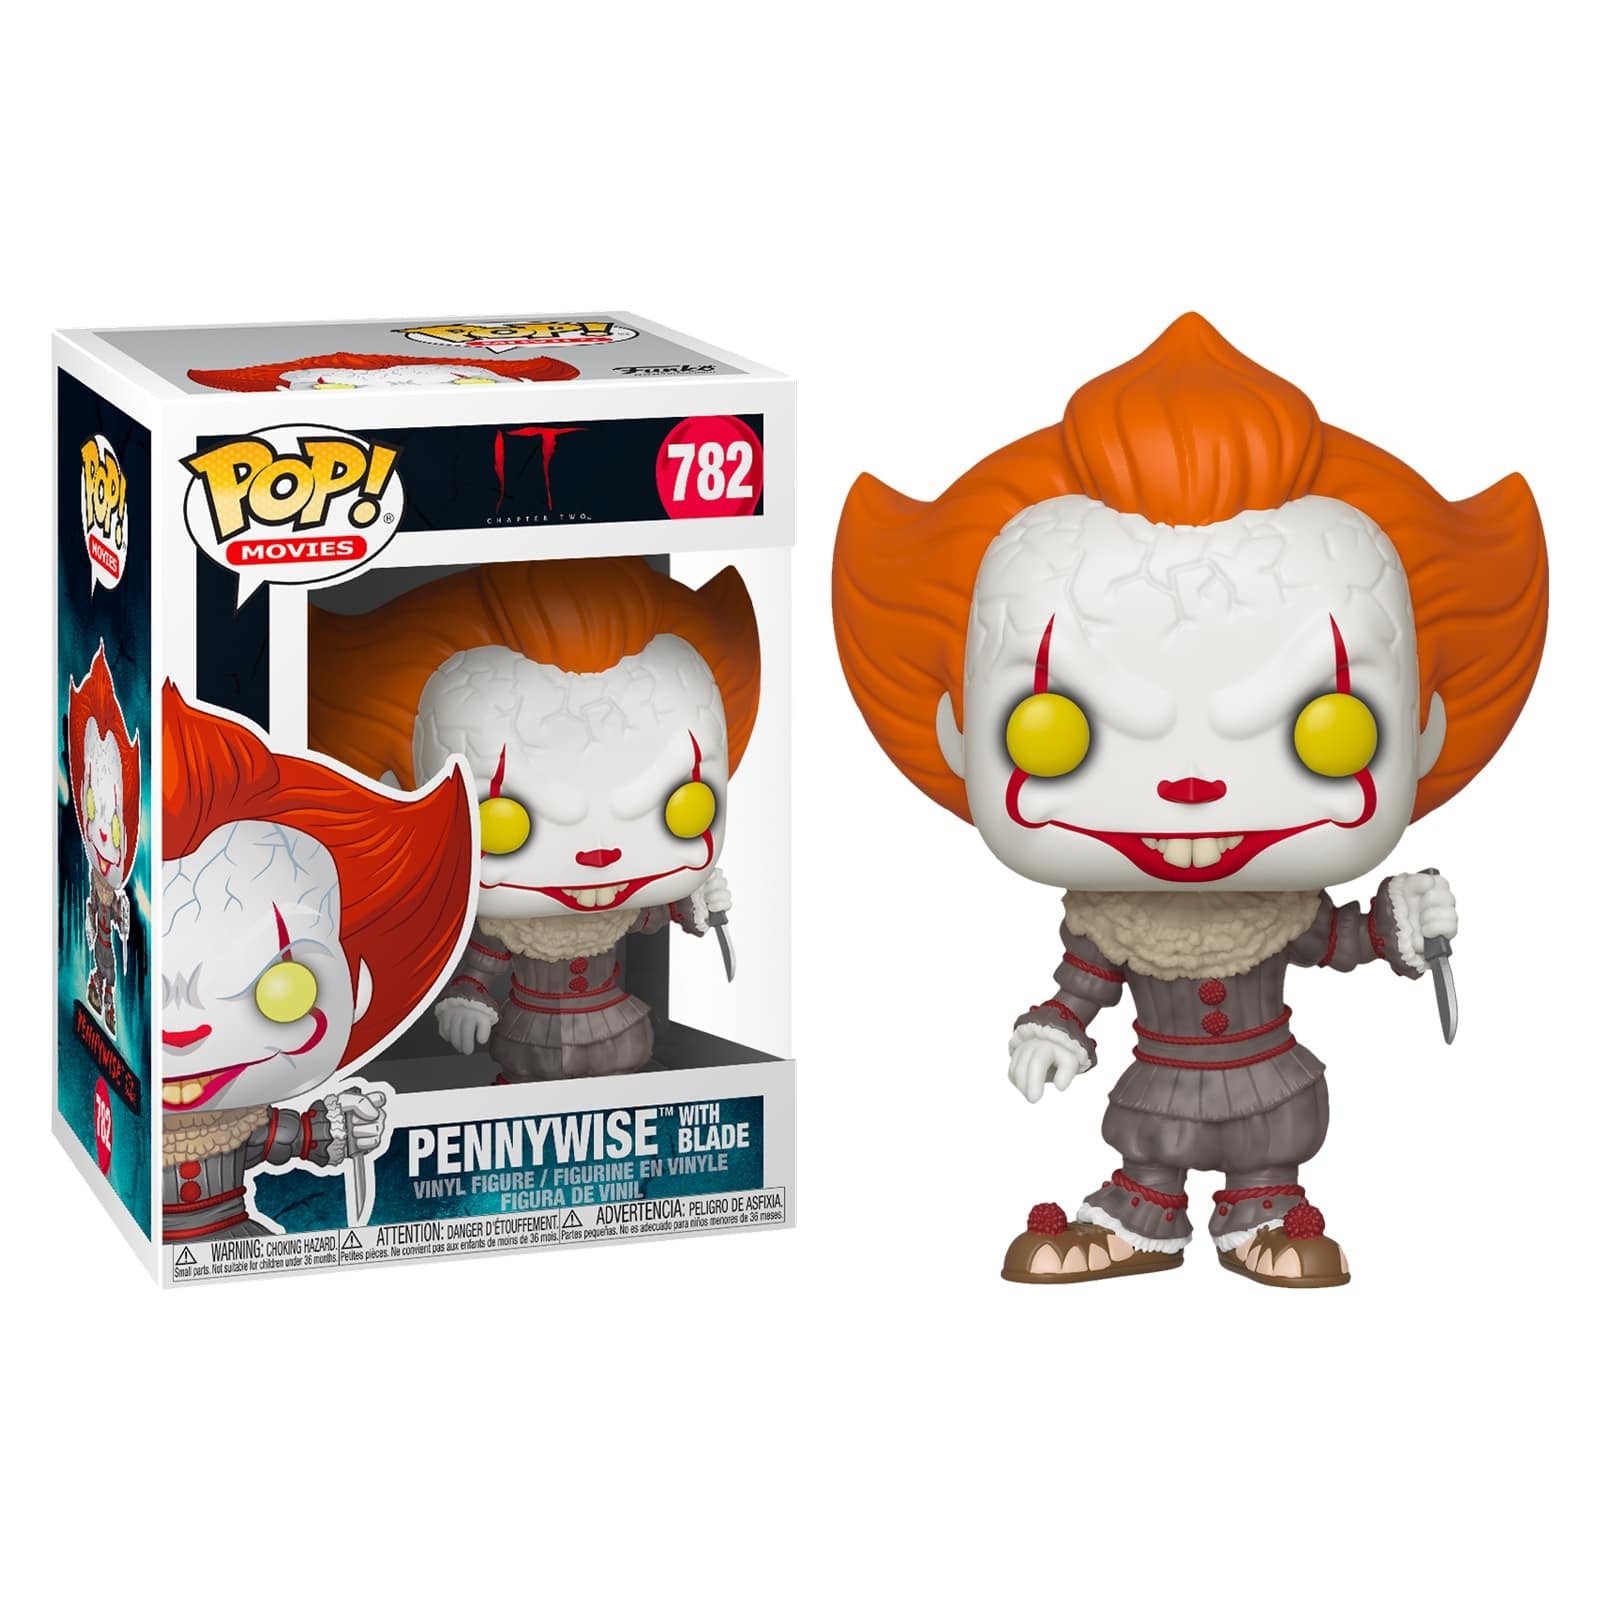 Funko Pop! Movies: IT Chapter 2 - Pennywise with Blade